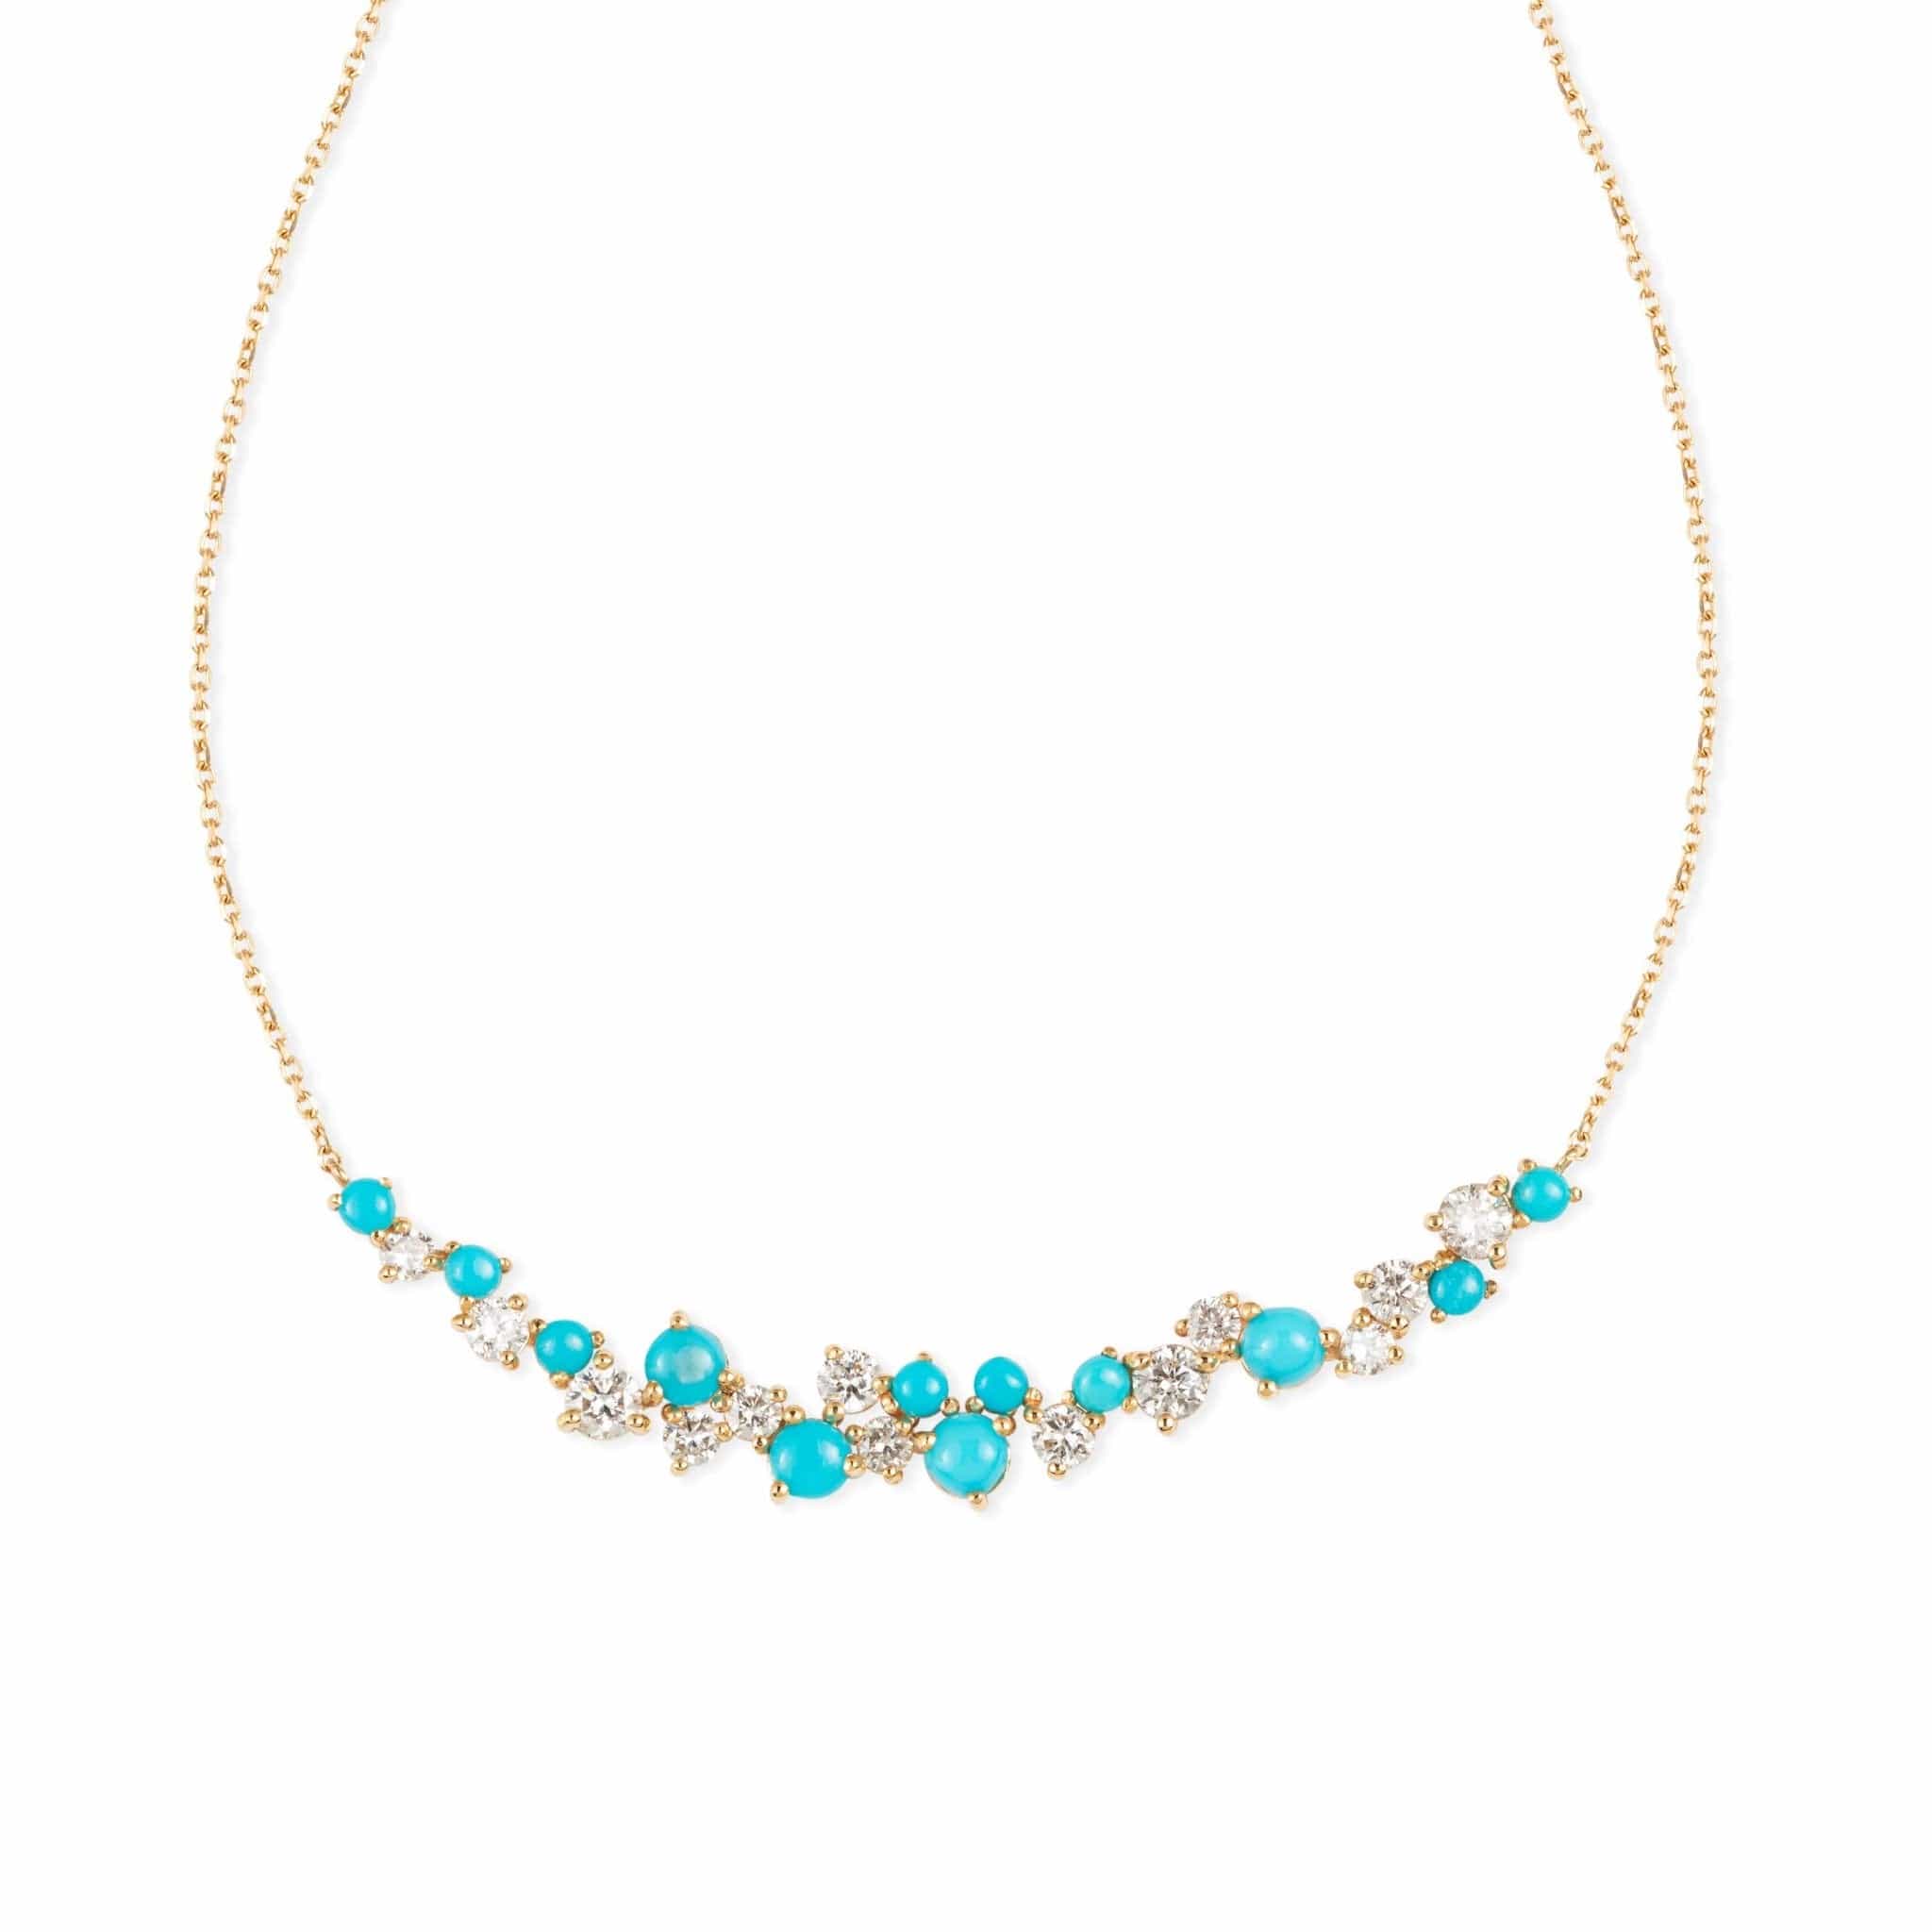 Diamonds And Turquoise Necklace - M.Fitaihi